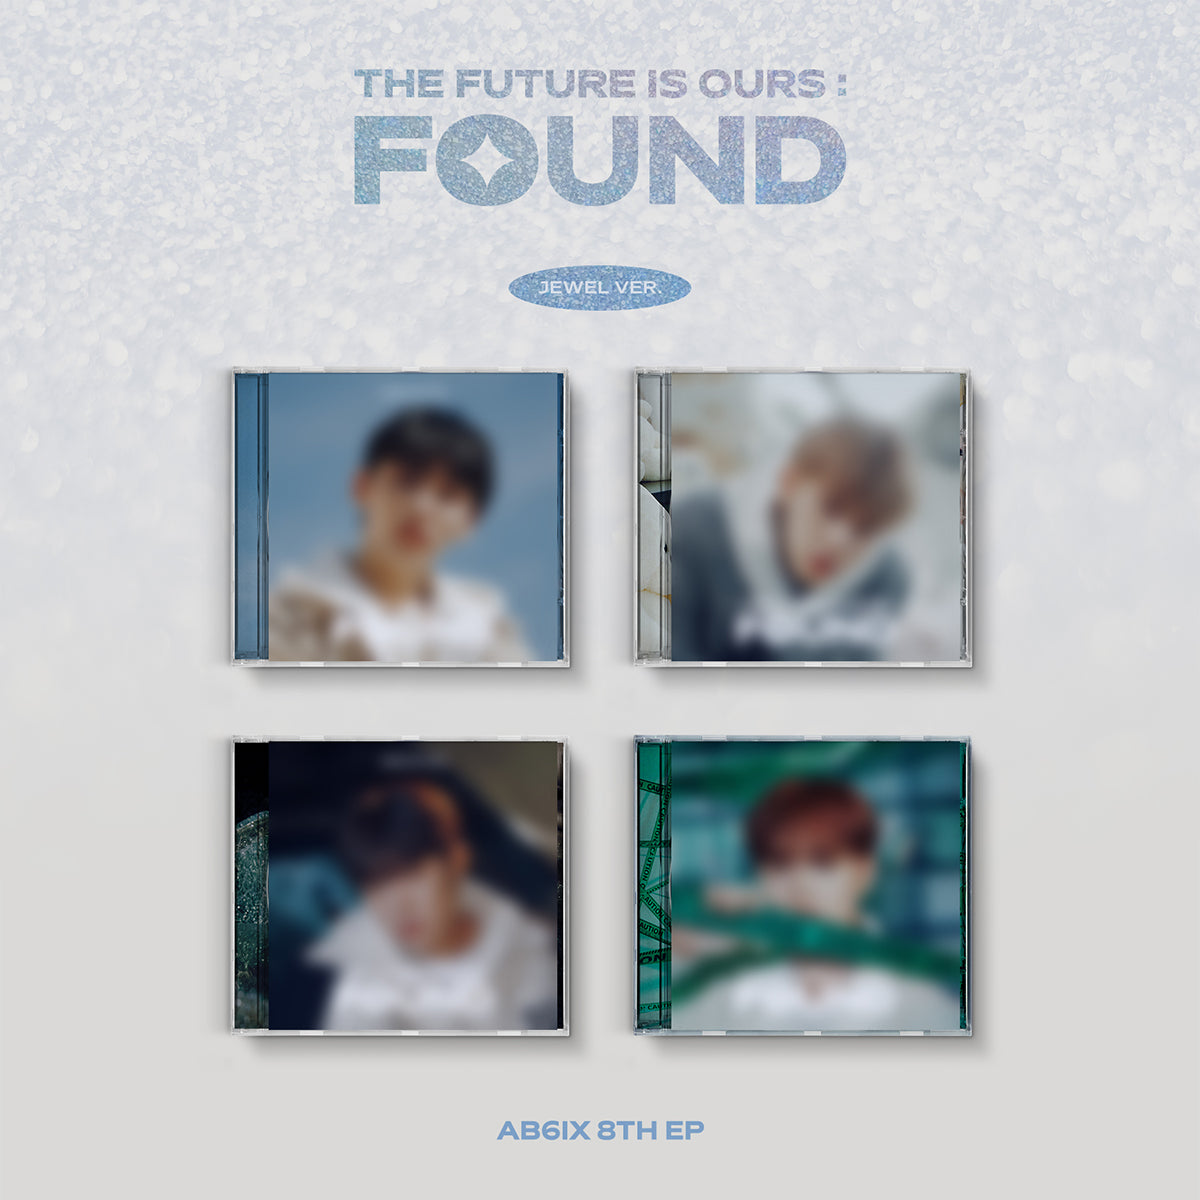 AB6IX - THE FUTURE IS OURS : FOUND (Jewel Ver.) (Random)